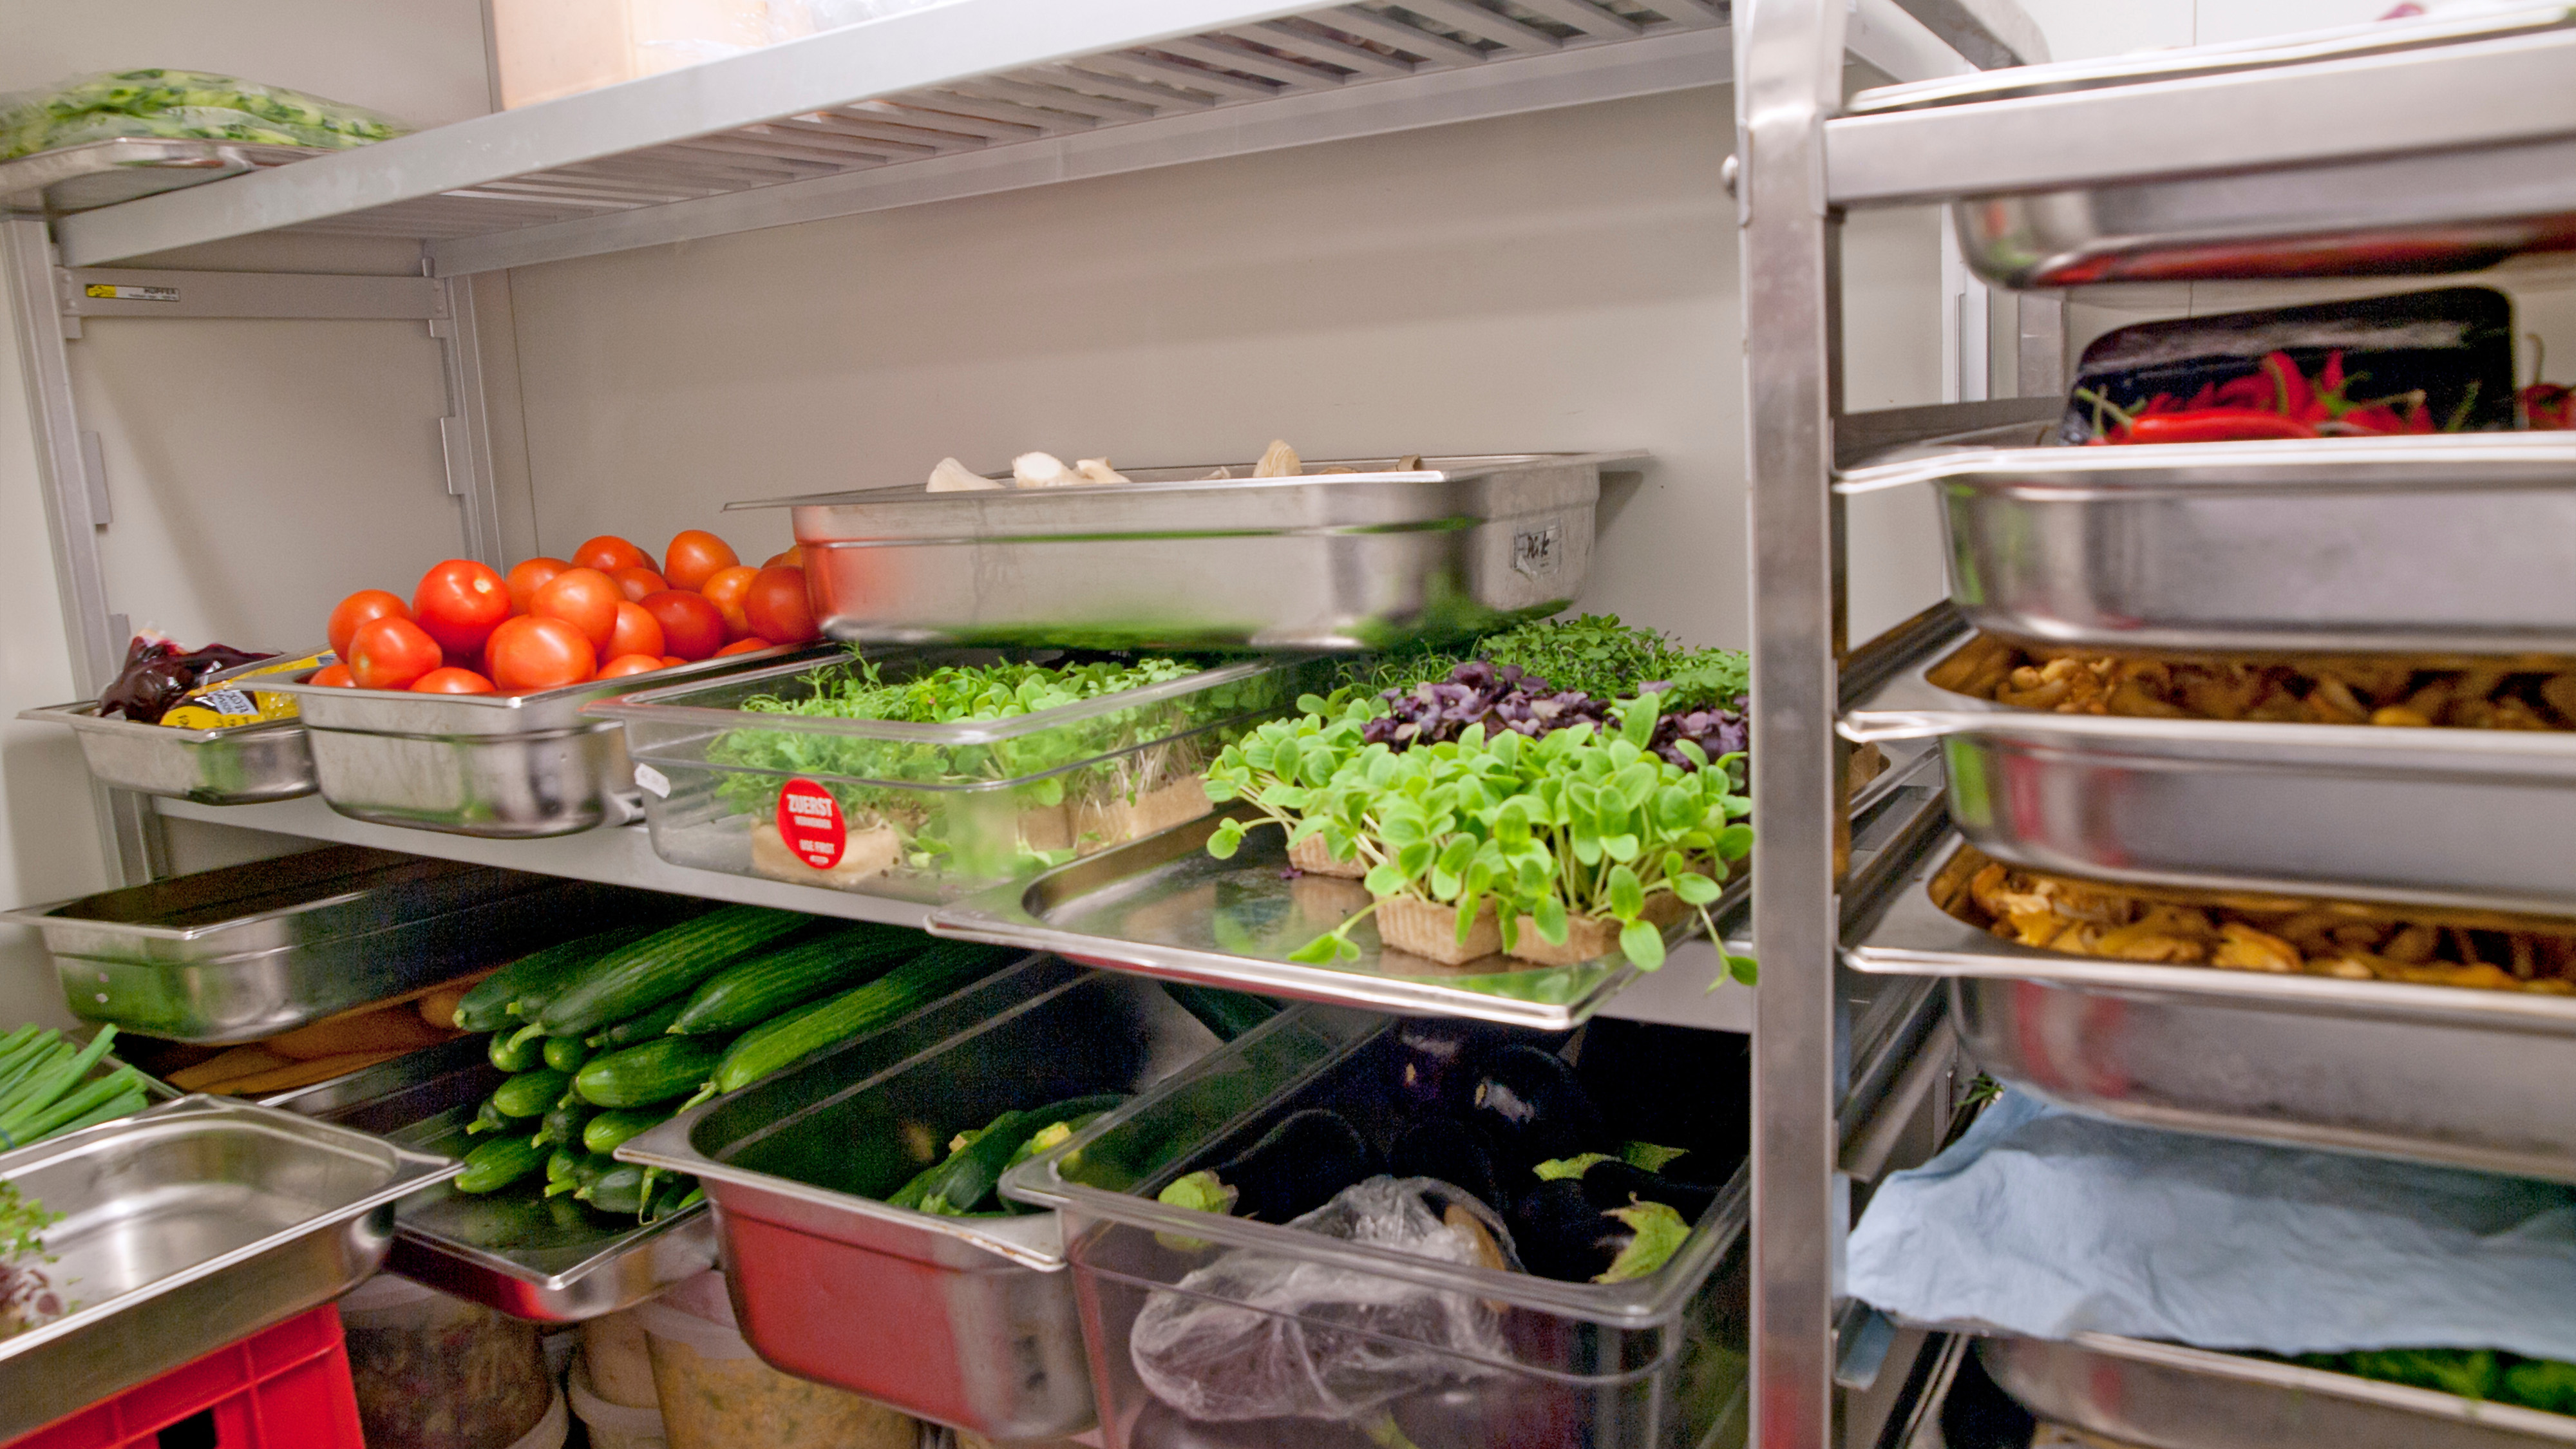 Common Indications Your Walk-In Freezer May Need Repair